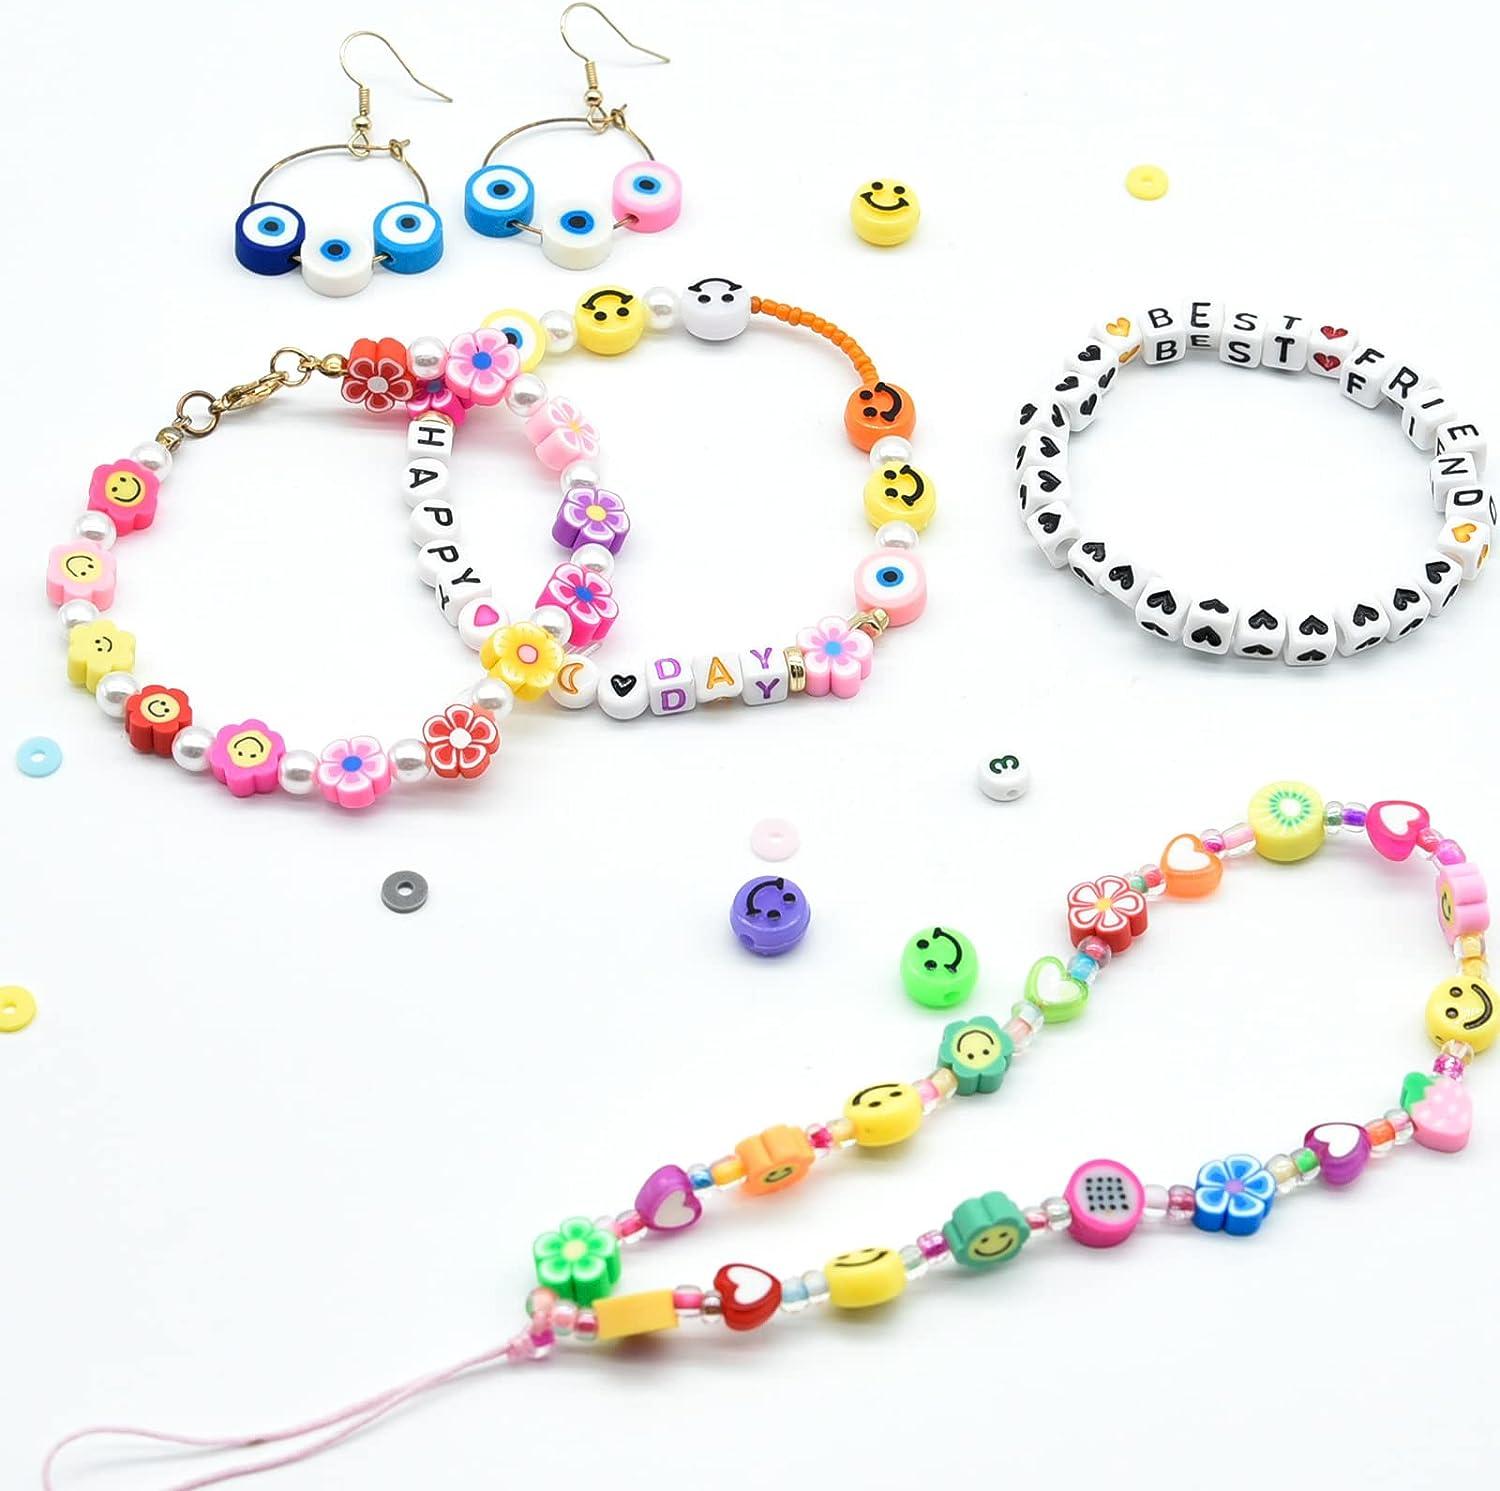 Beads For Jewelry Making Kids Adults Aesthetic With Alphabet Letters B